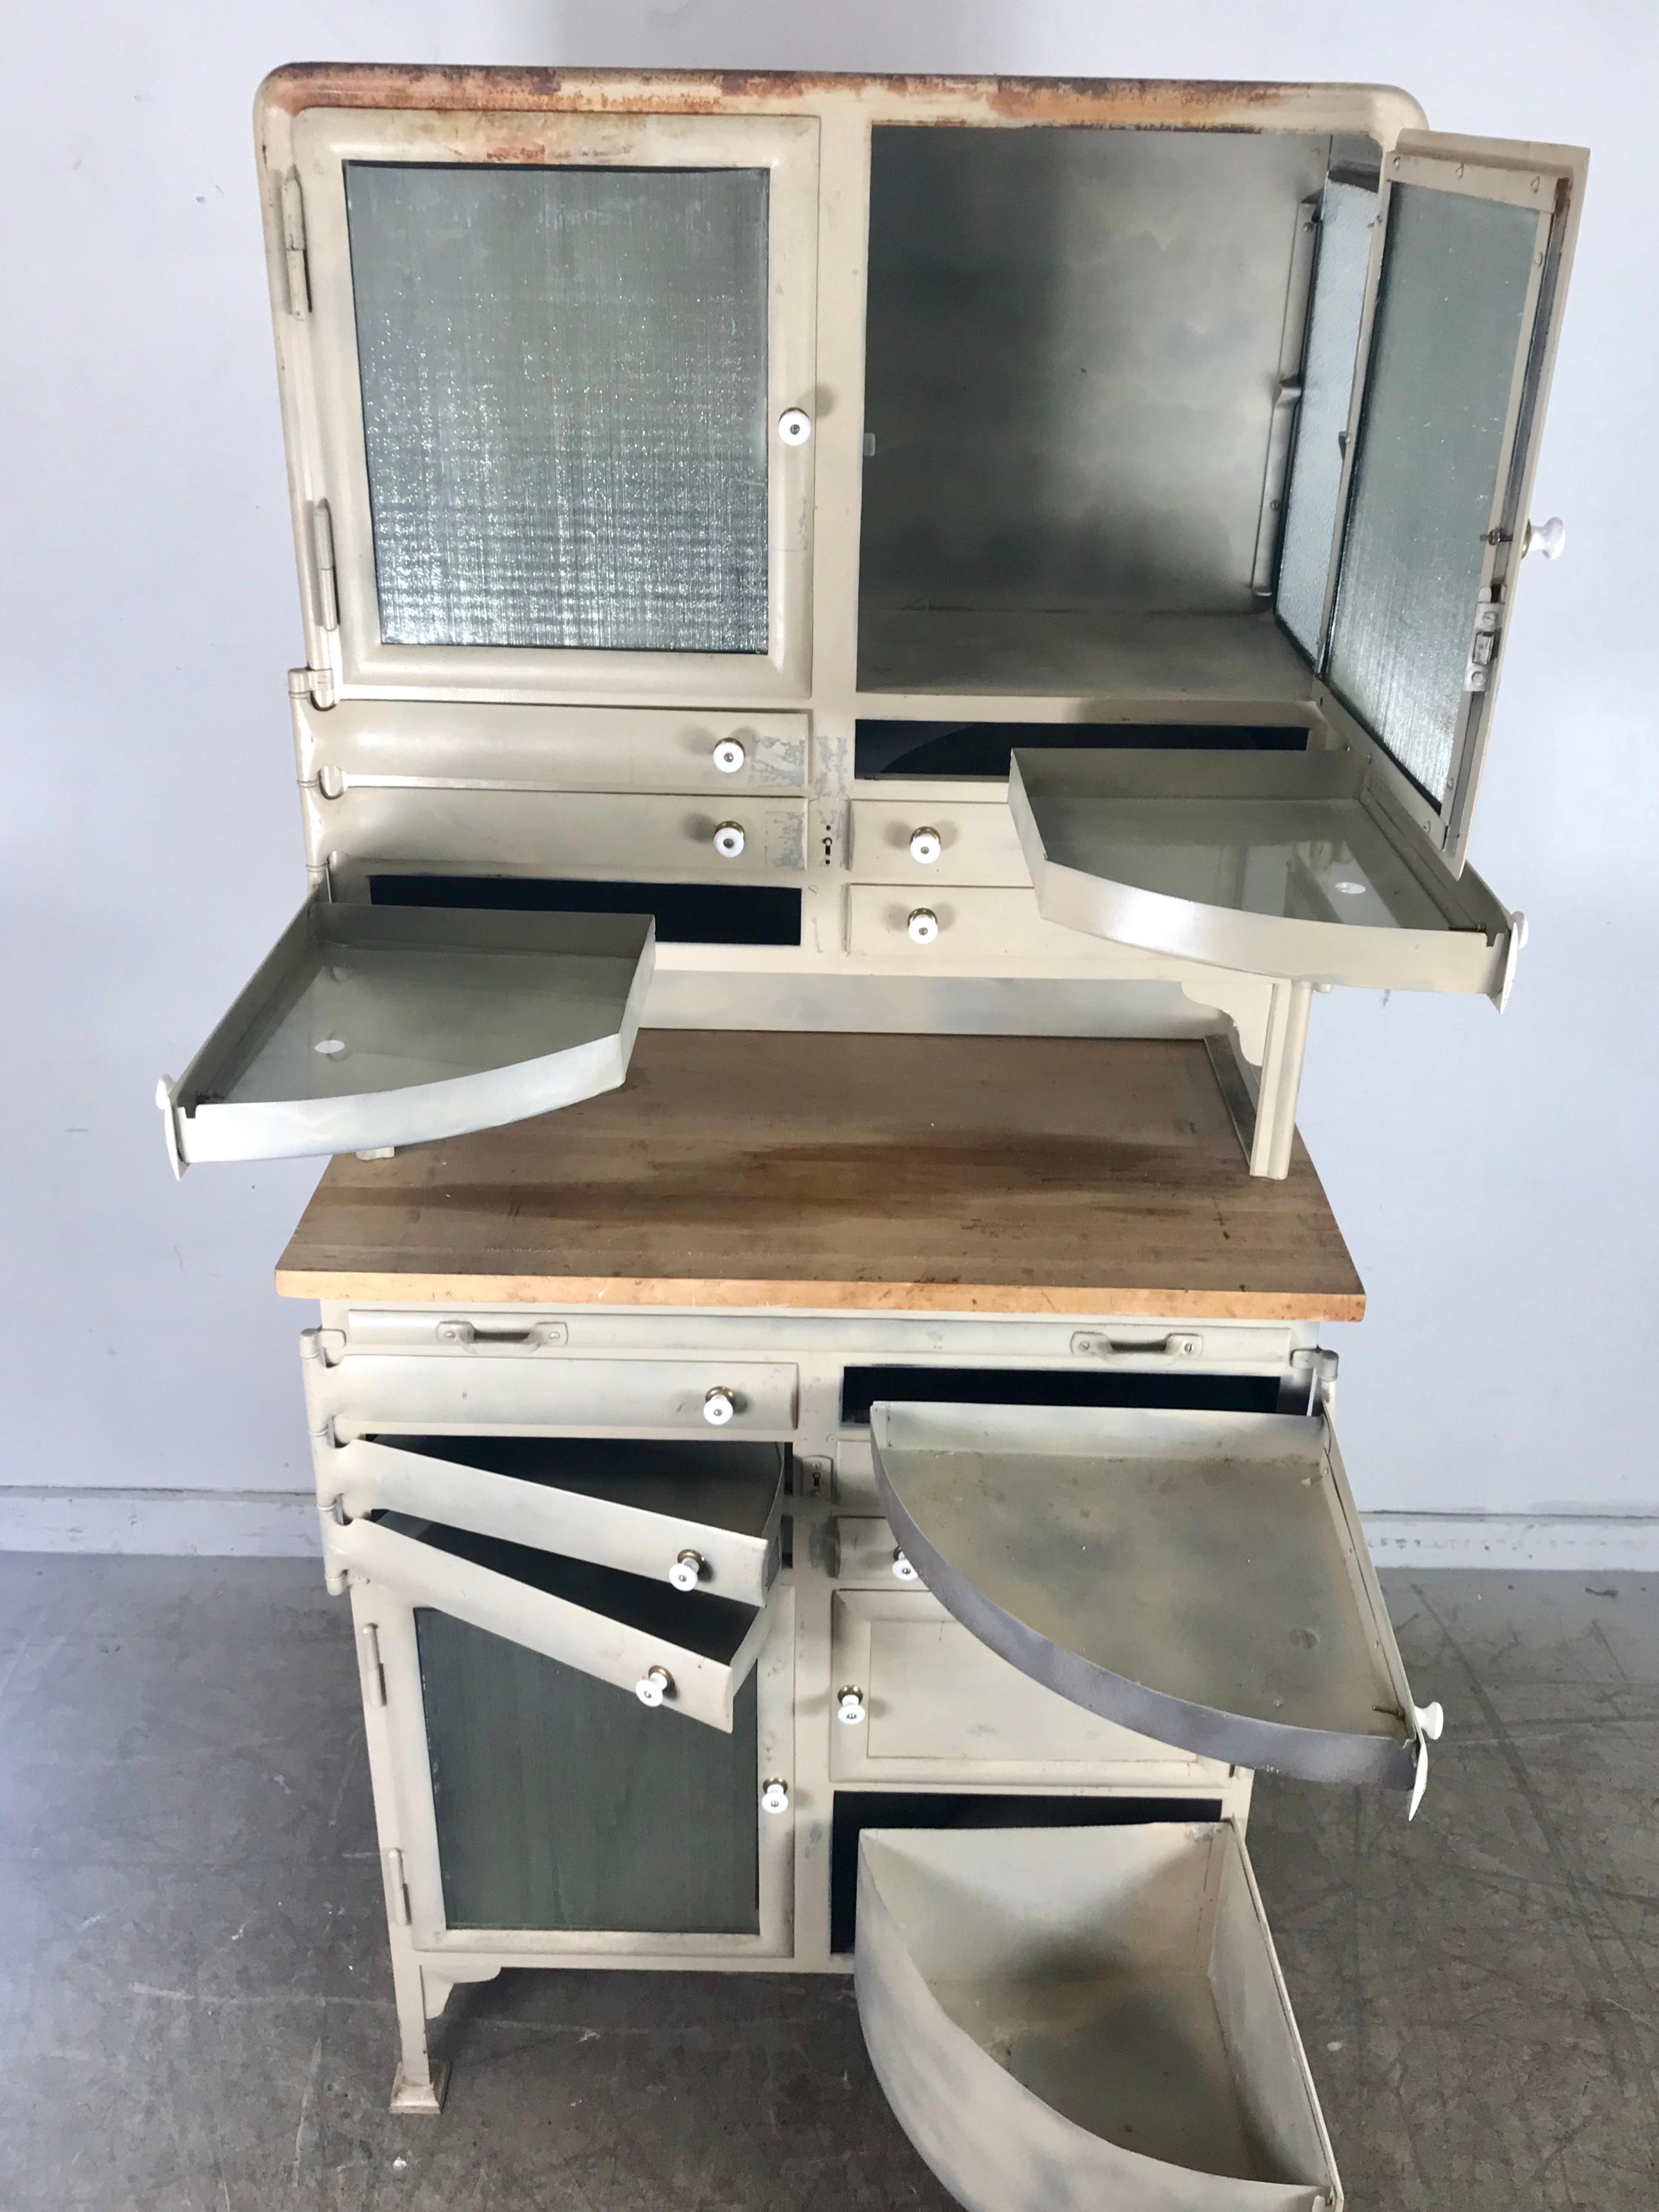 1940s cast steel industrial medical cabinet, multi pie wedge drawers and doors, old painted surface, wood top as well as pull-out wood work surface. Wonderful proportions and design, hand pulls have been replaced at some point in its life, retains